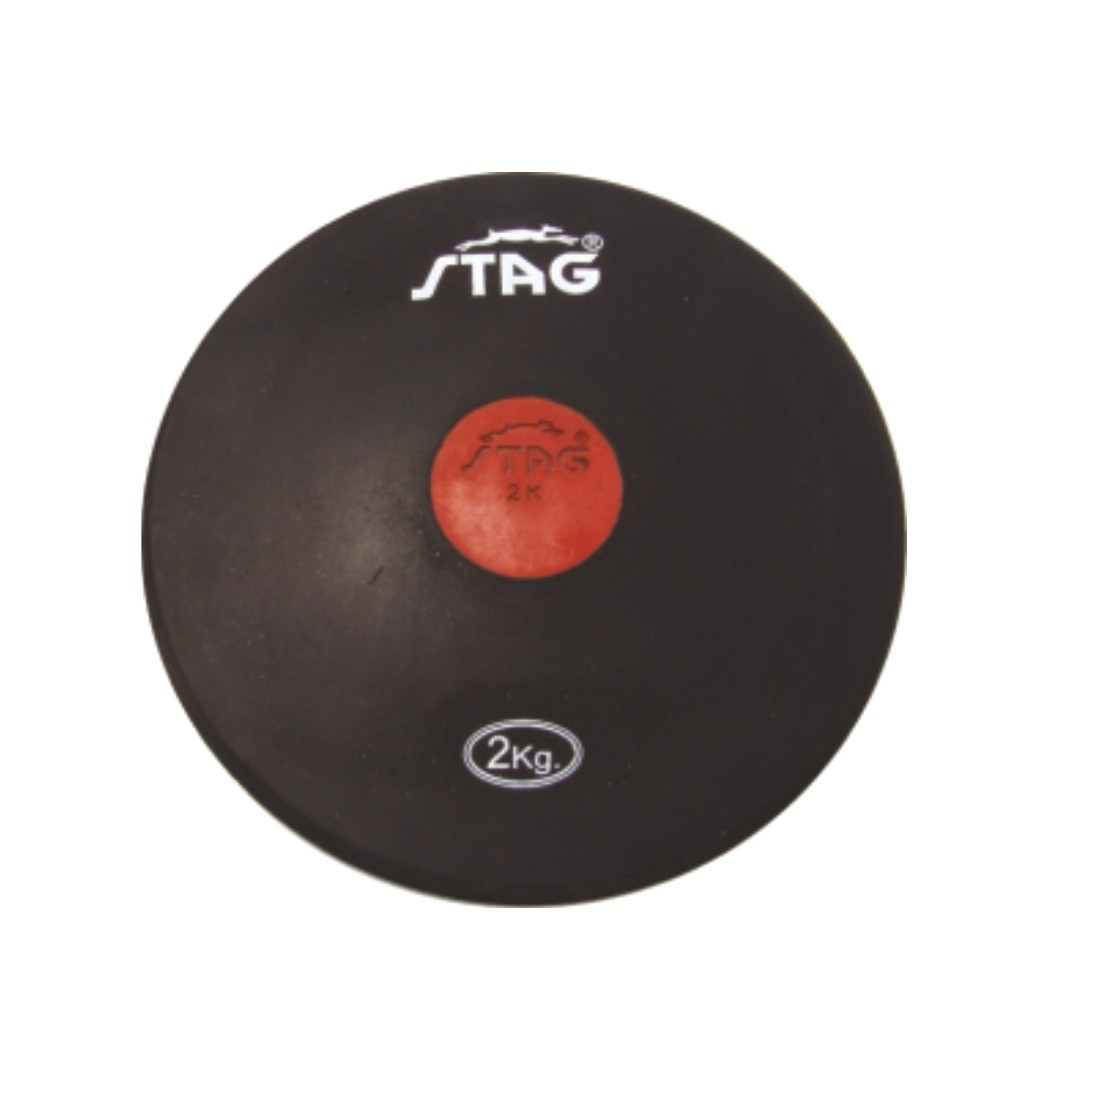 STAG DISCUS BLACK SYNTHETIC RUBBER 1.5 KG